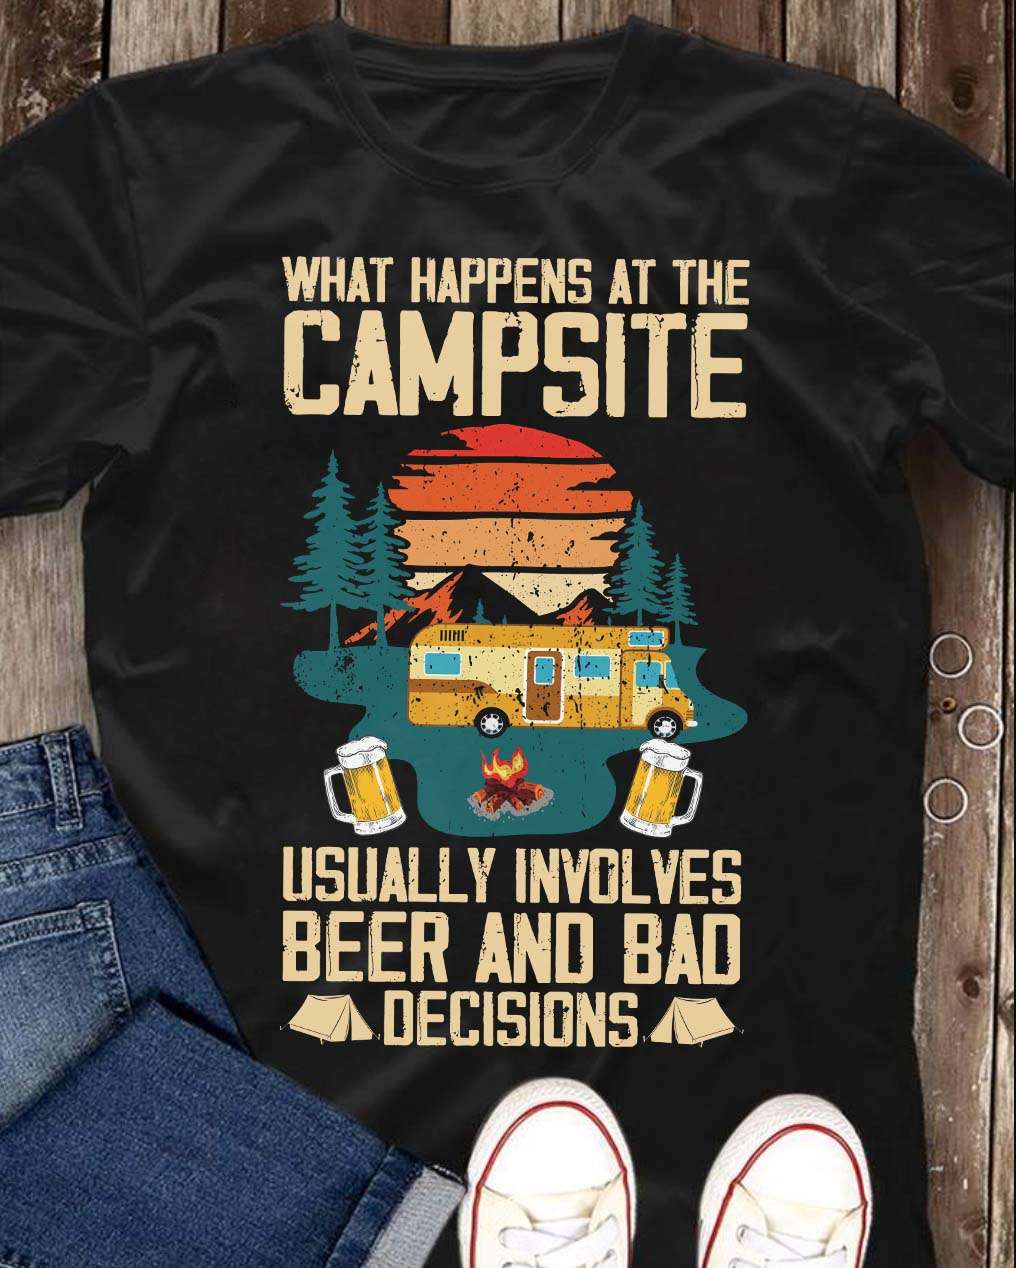 What happens at the campsite usually involves beer and bad decisions - Drinking and camping, camping car campsite